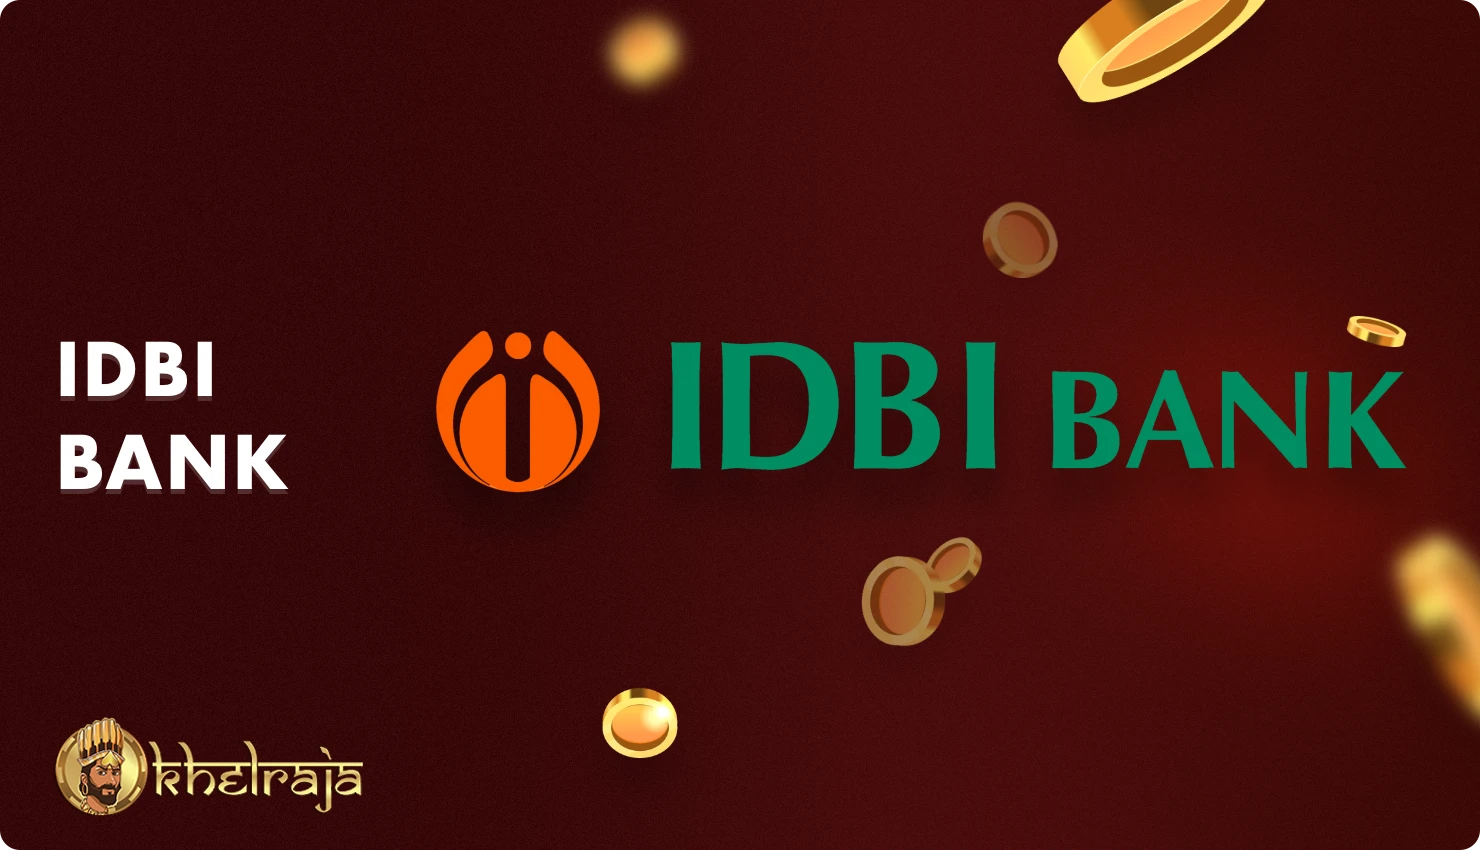 Khelraja users from India can use IDBi Bank for financial transactions